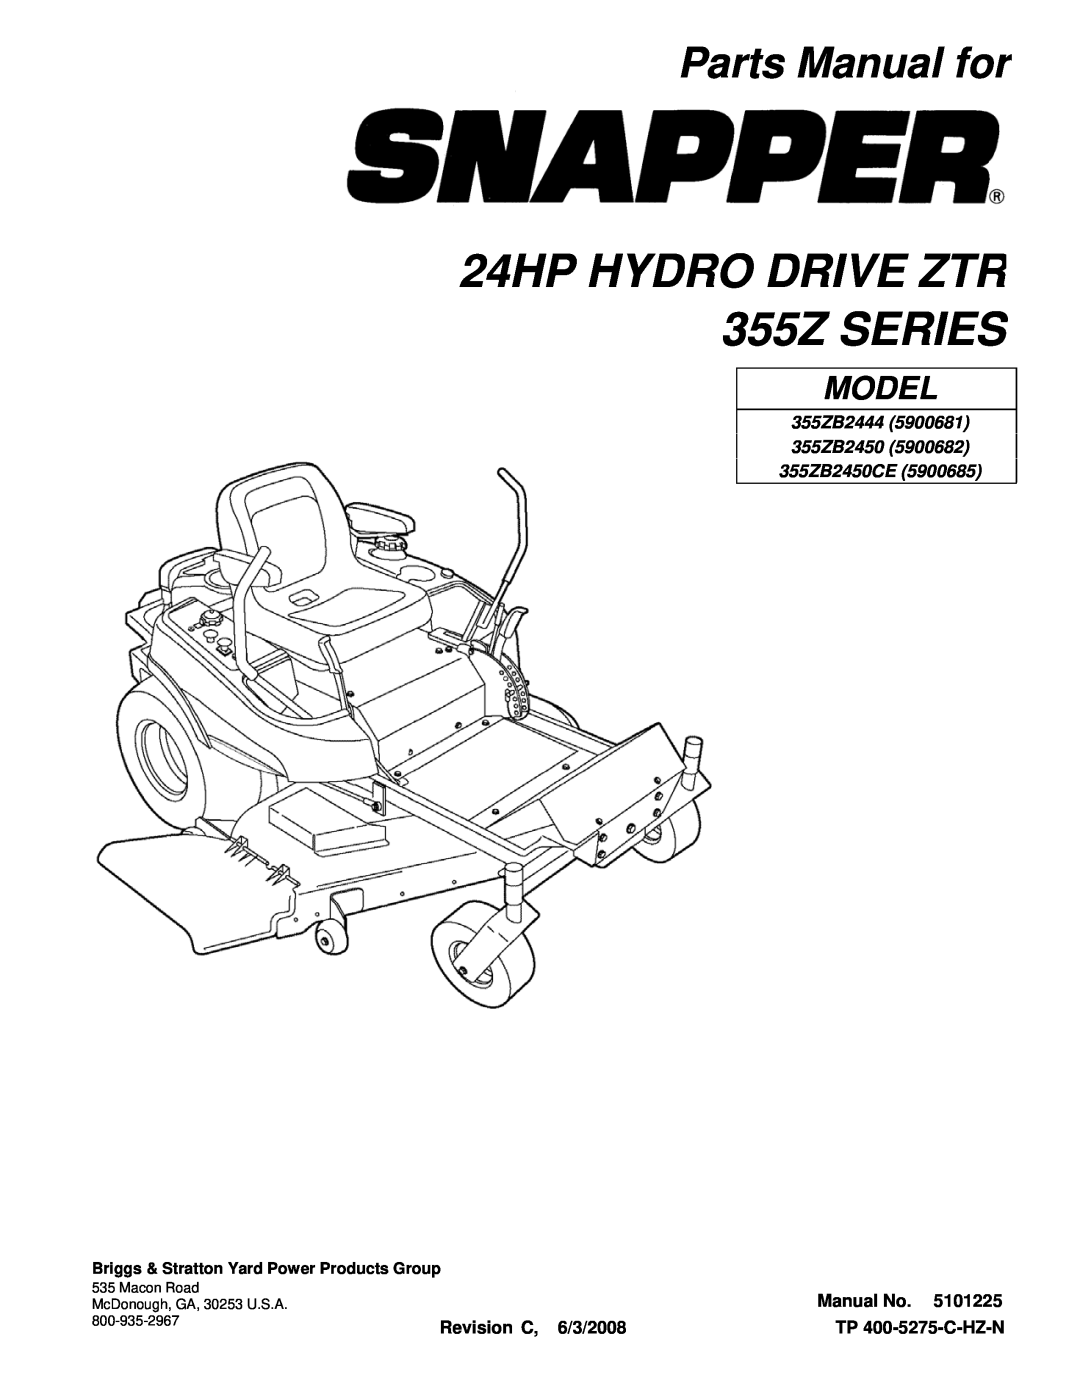 Snapper manual Parts Manual for, 24HP HYDRO DRIVE ZTR 355Z SERIES, Model, 355ZB2444 5900681 355ZB2450 355ZB2450CE 